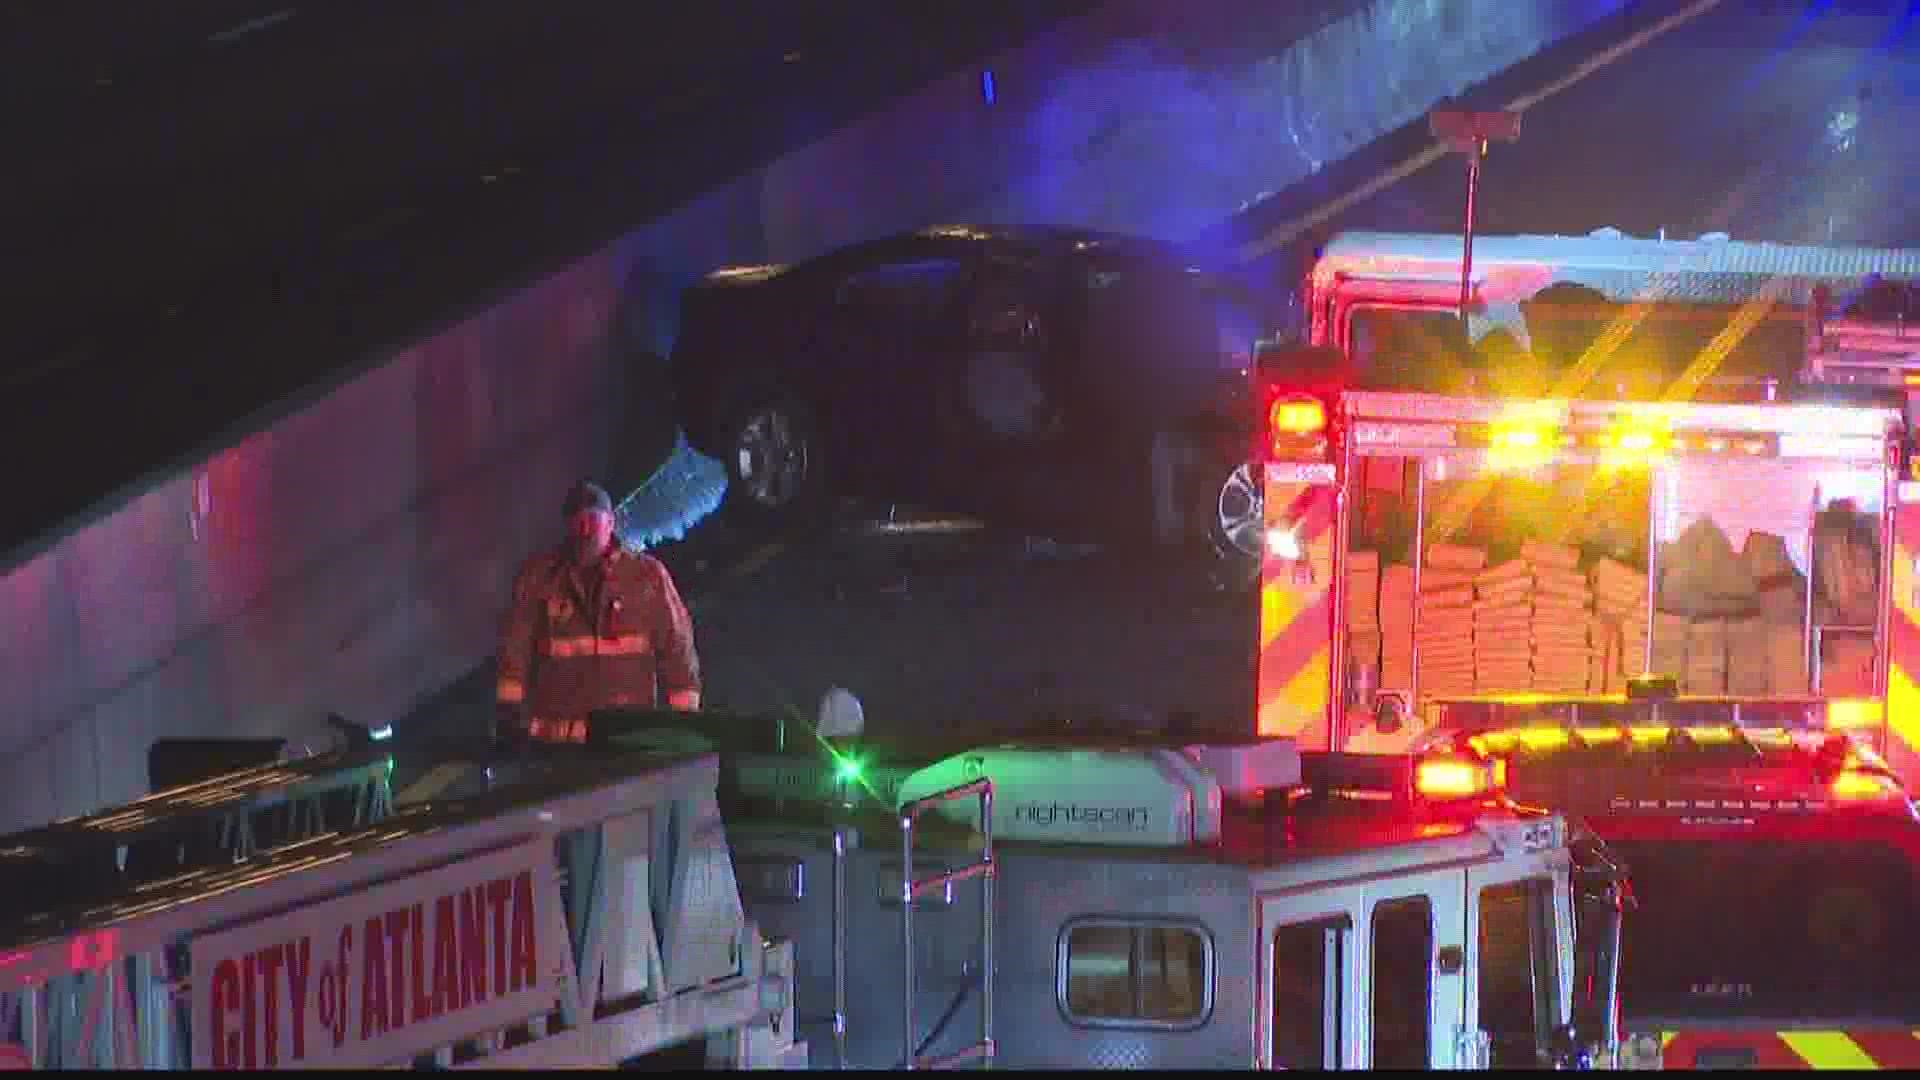 The crash happed near the I-285 exit on the west side of the perimeter Sunday around 5 a.m.